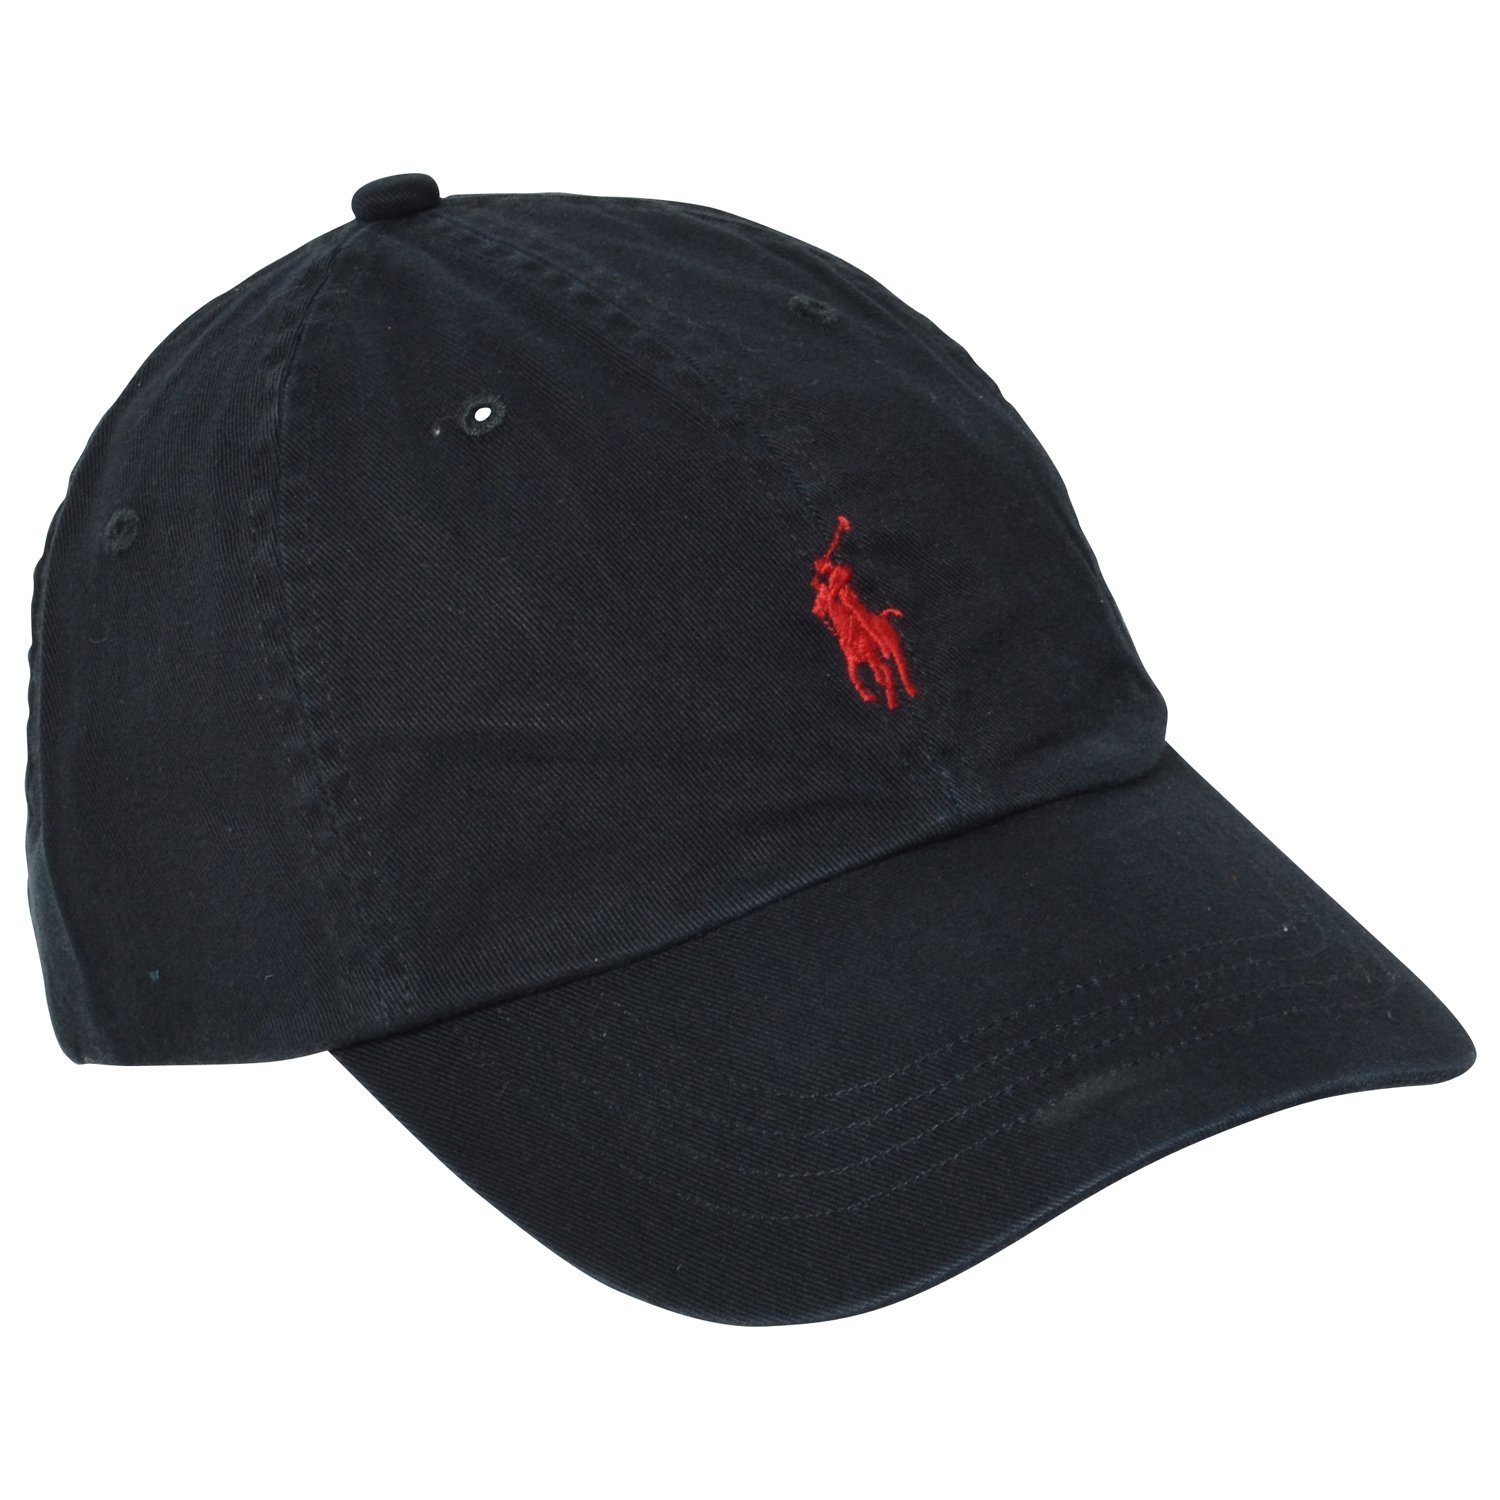 black polo hat with white horse \u003e Up to 